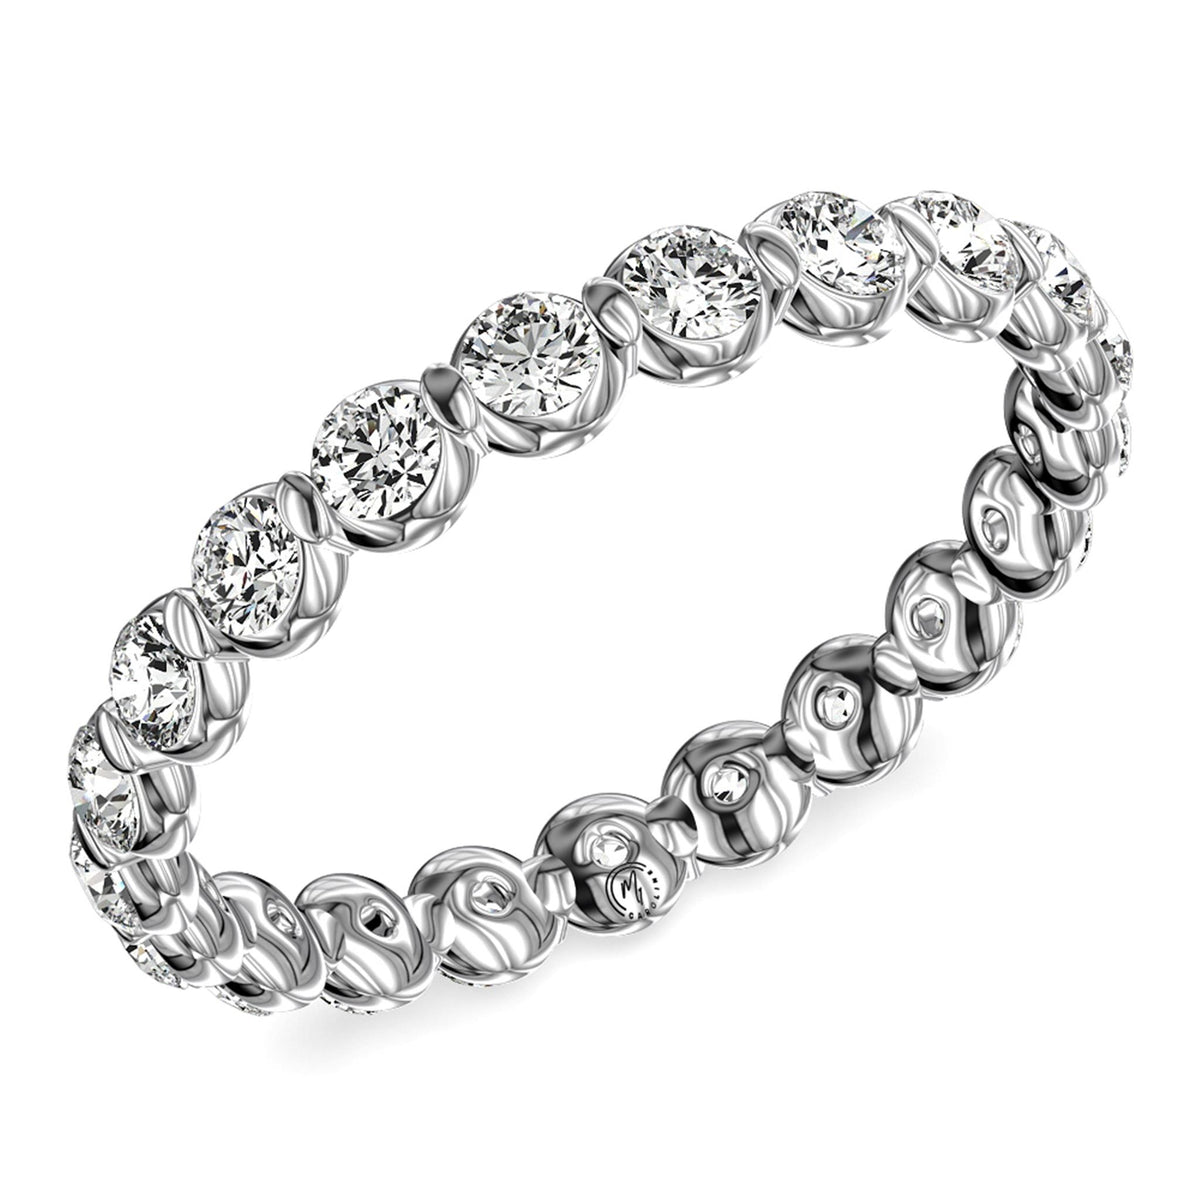 My Caroline14Kt White Gold Eternity Ring With 1.50cttw Natural Diamonds